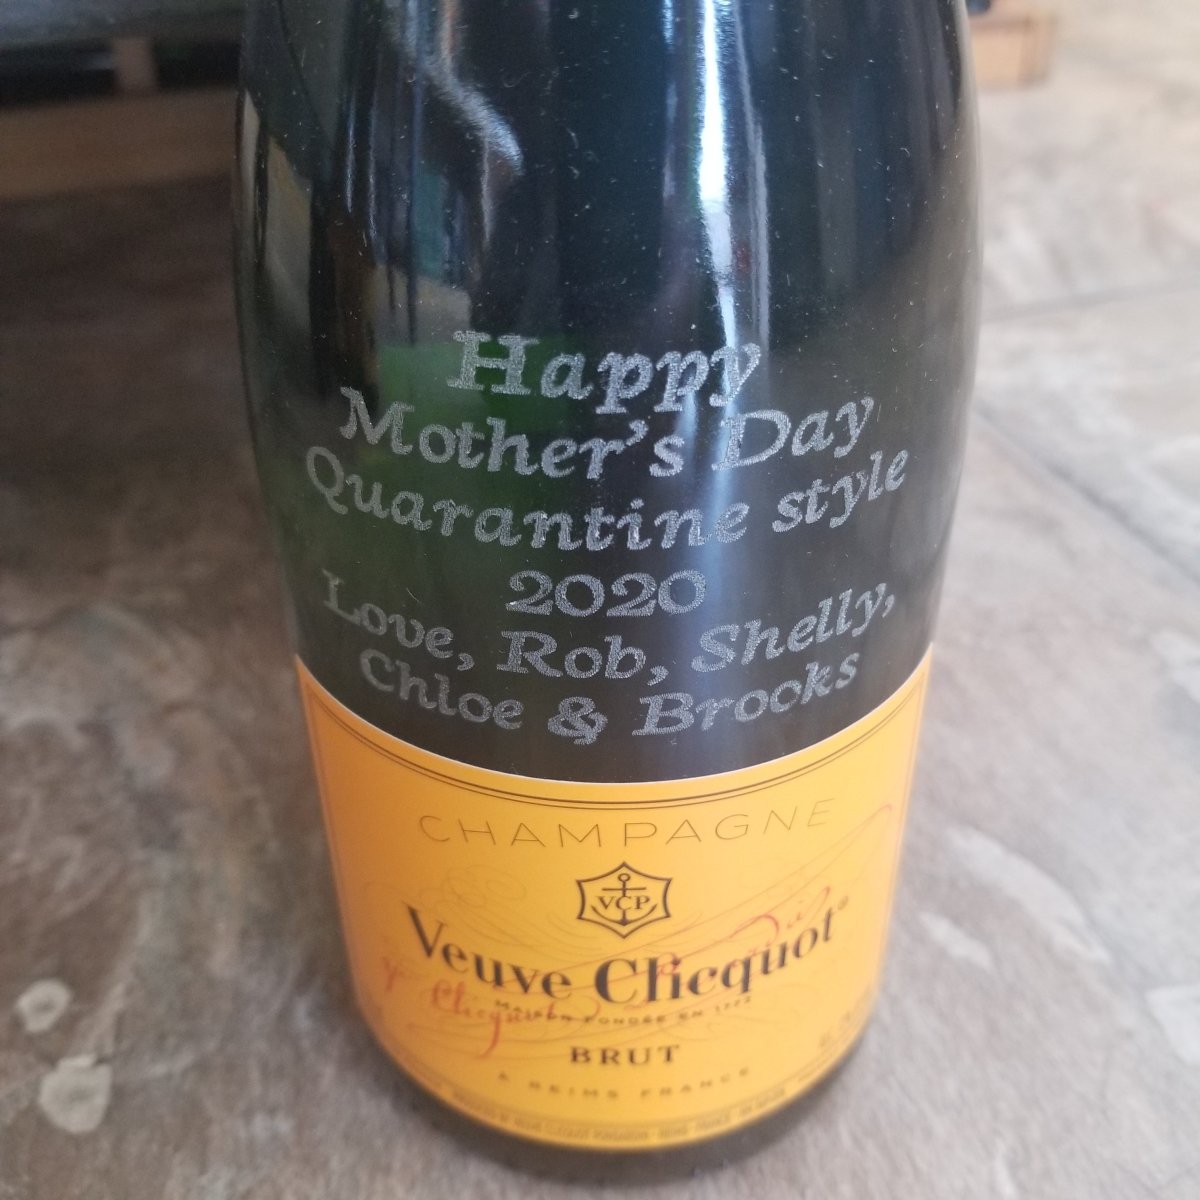 Veuve Cliquot Champagne 750ml Oops - Sip & Say